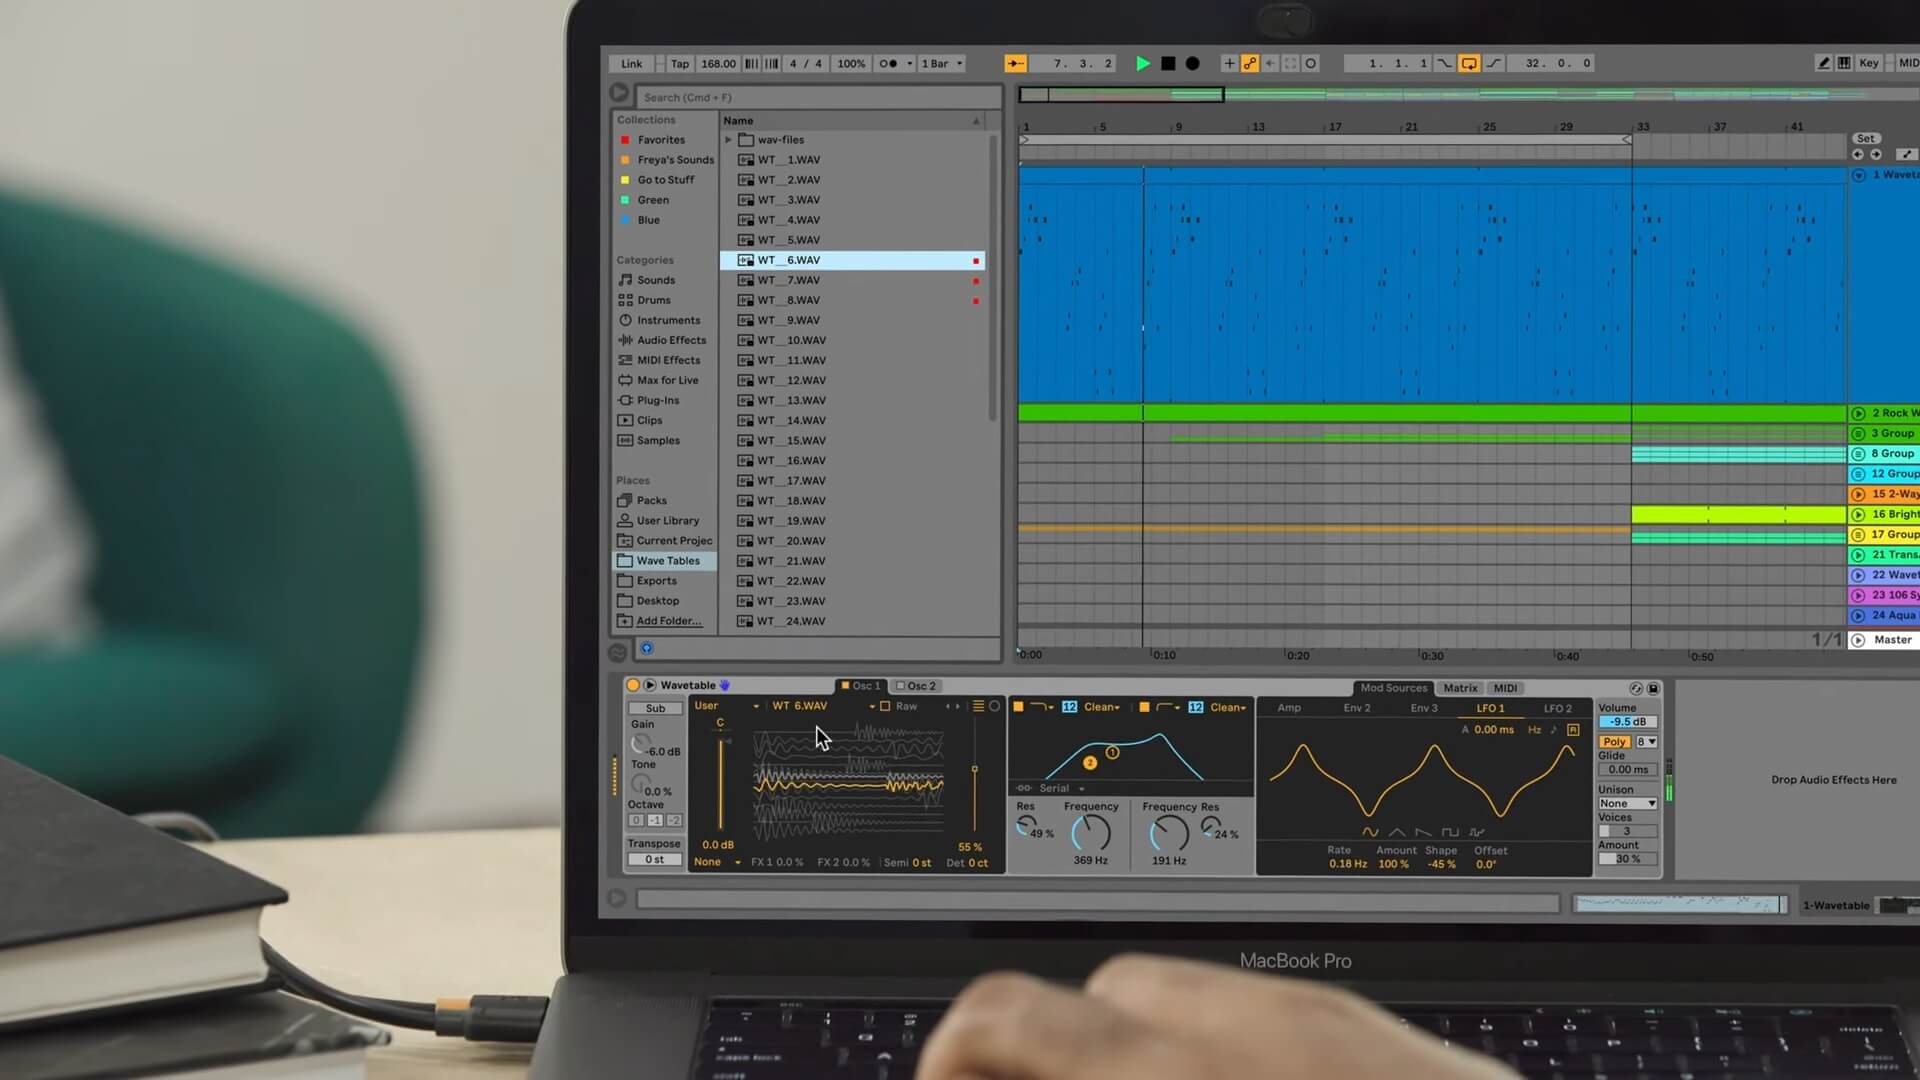 ableton simple delay gone